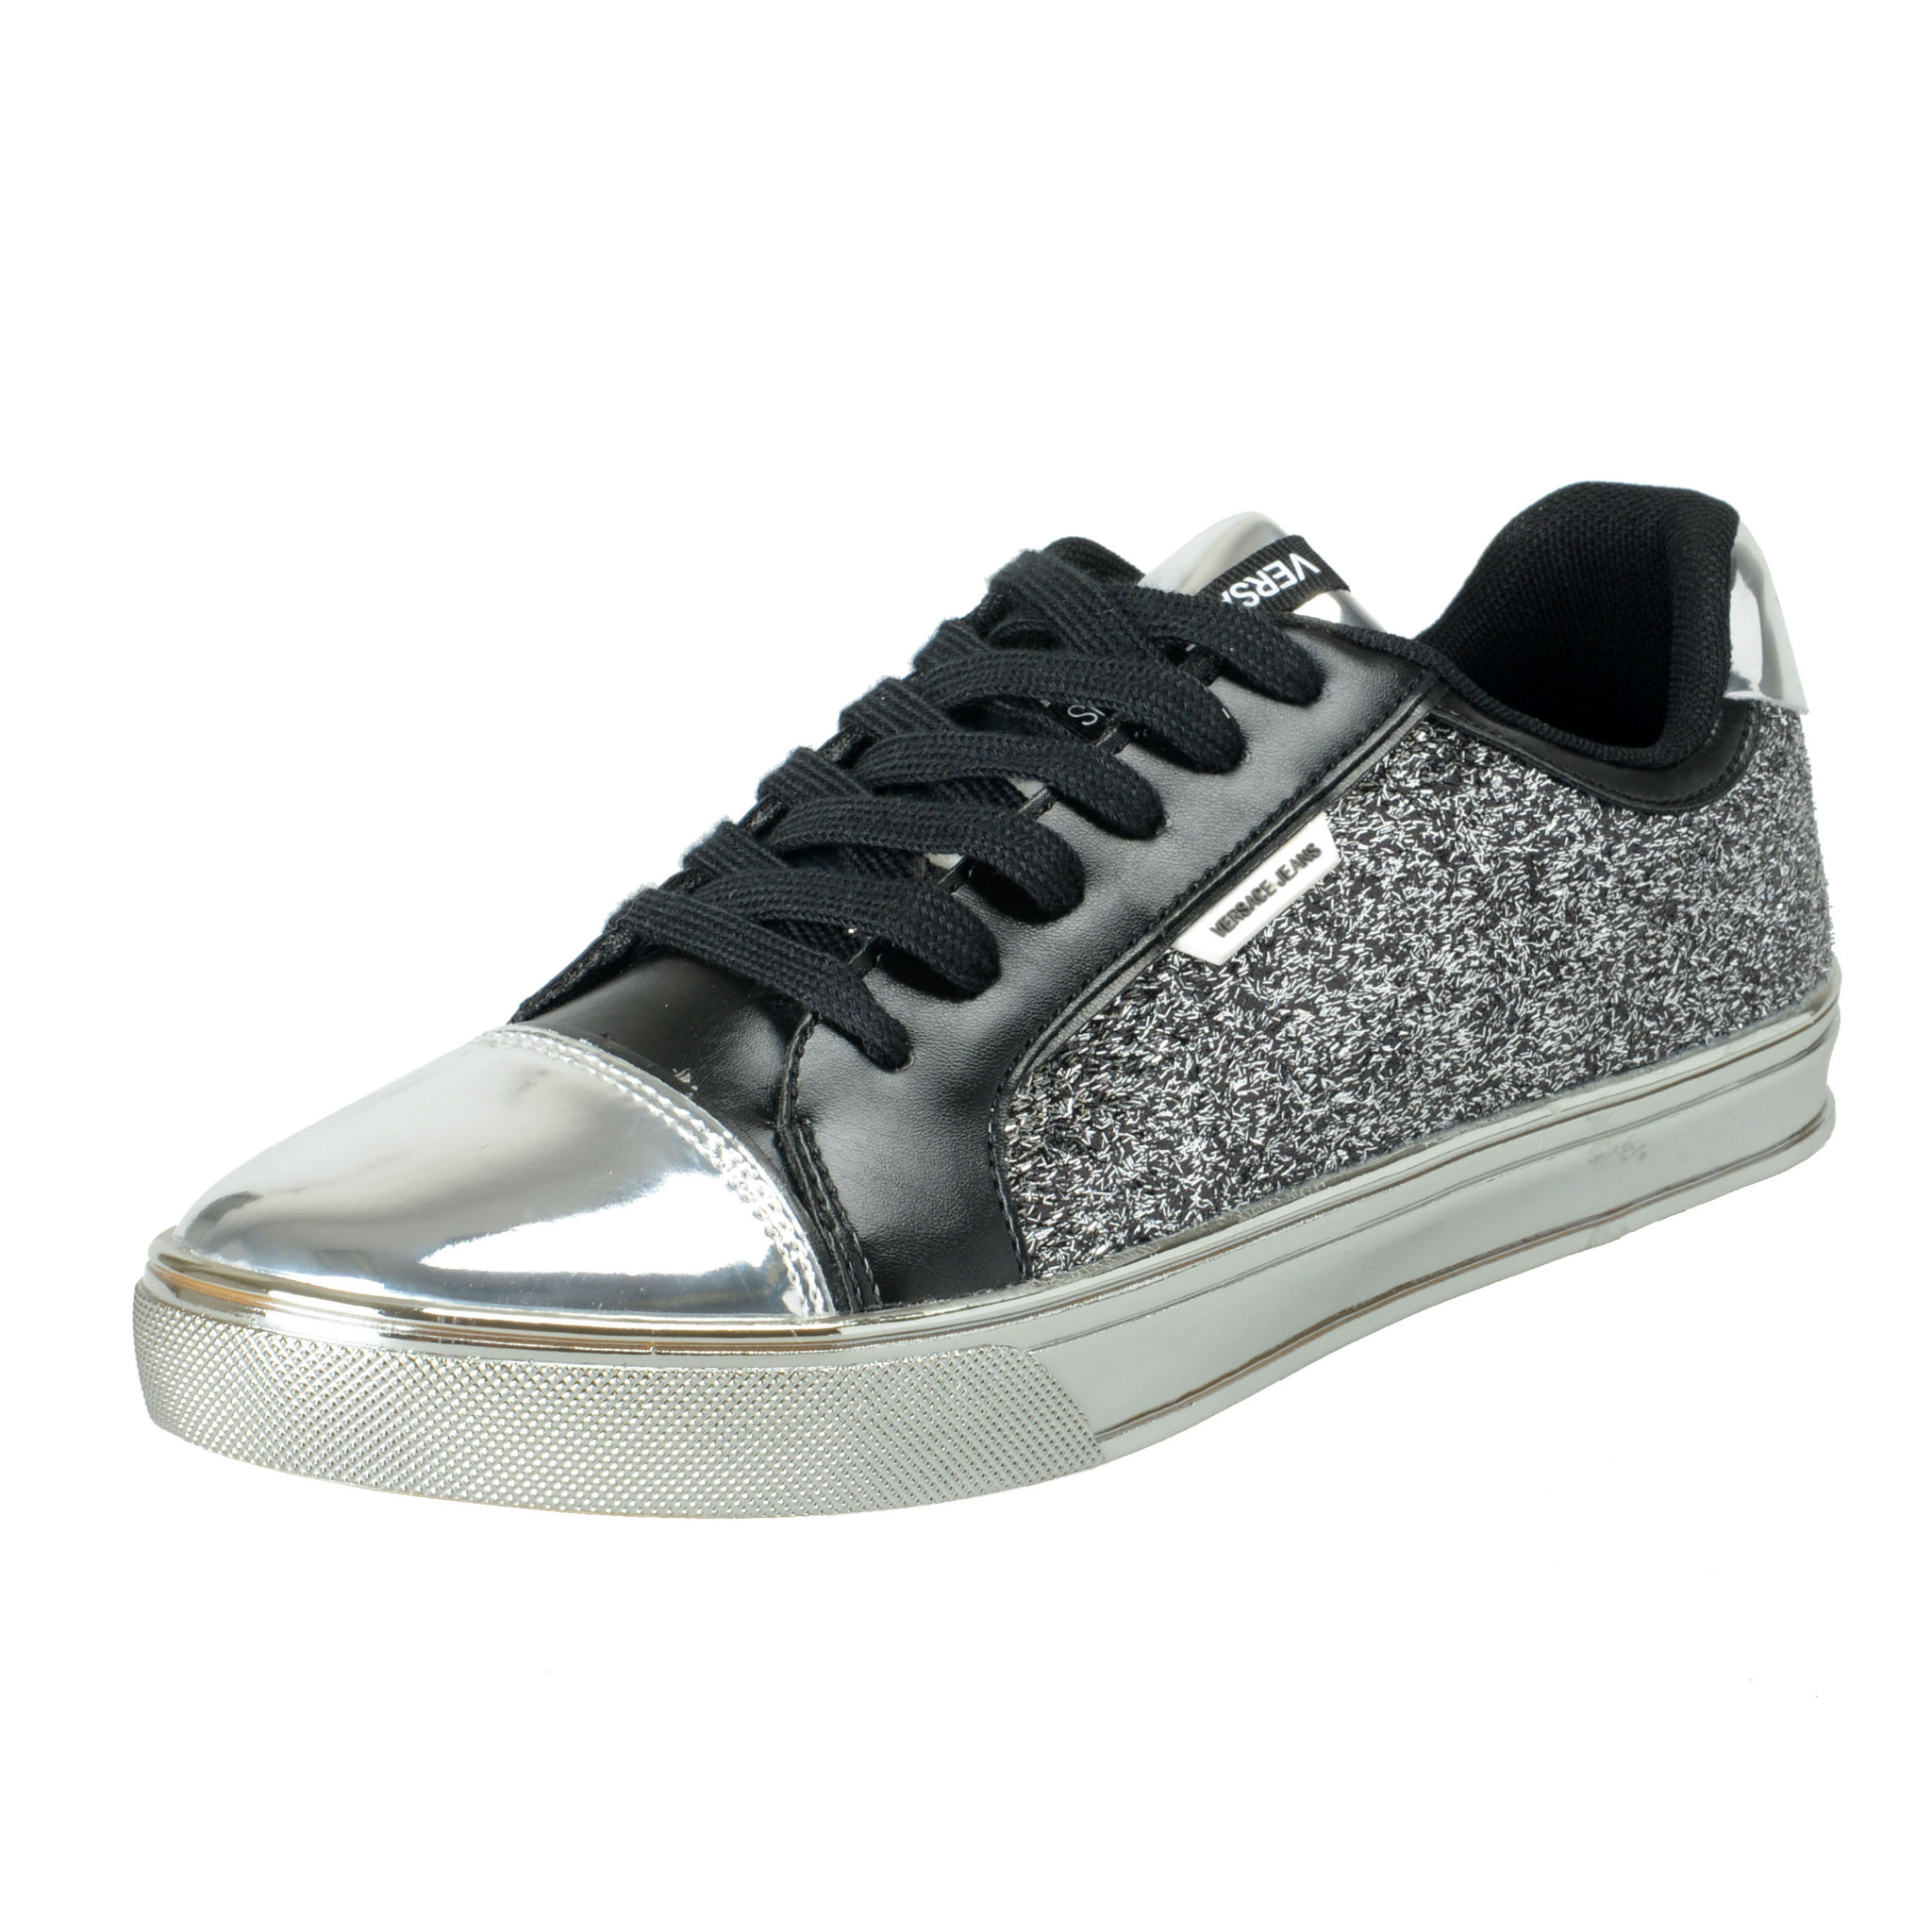 Sparkle Silver Fashion Sneakers Shoes 